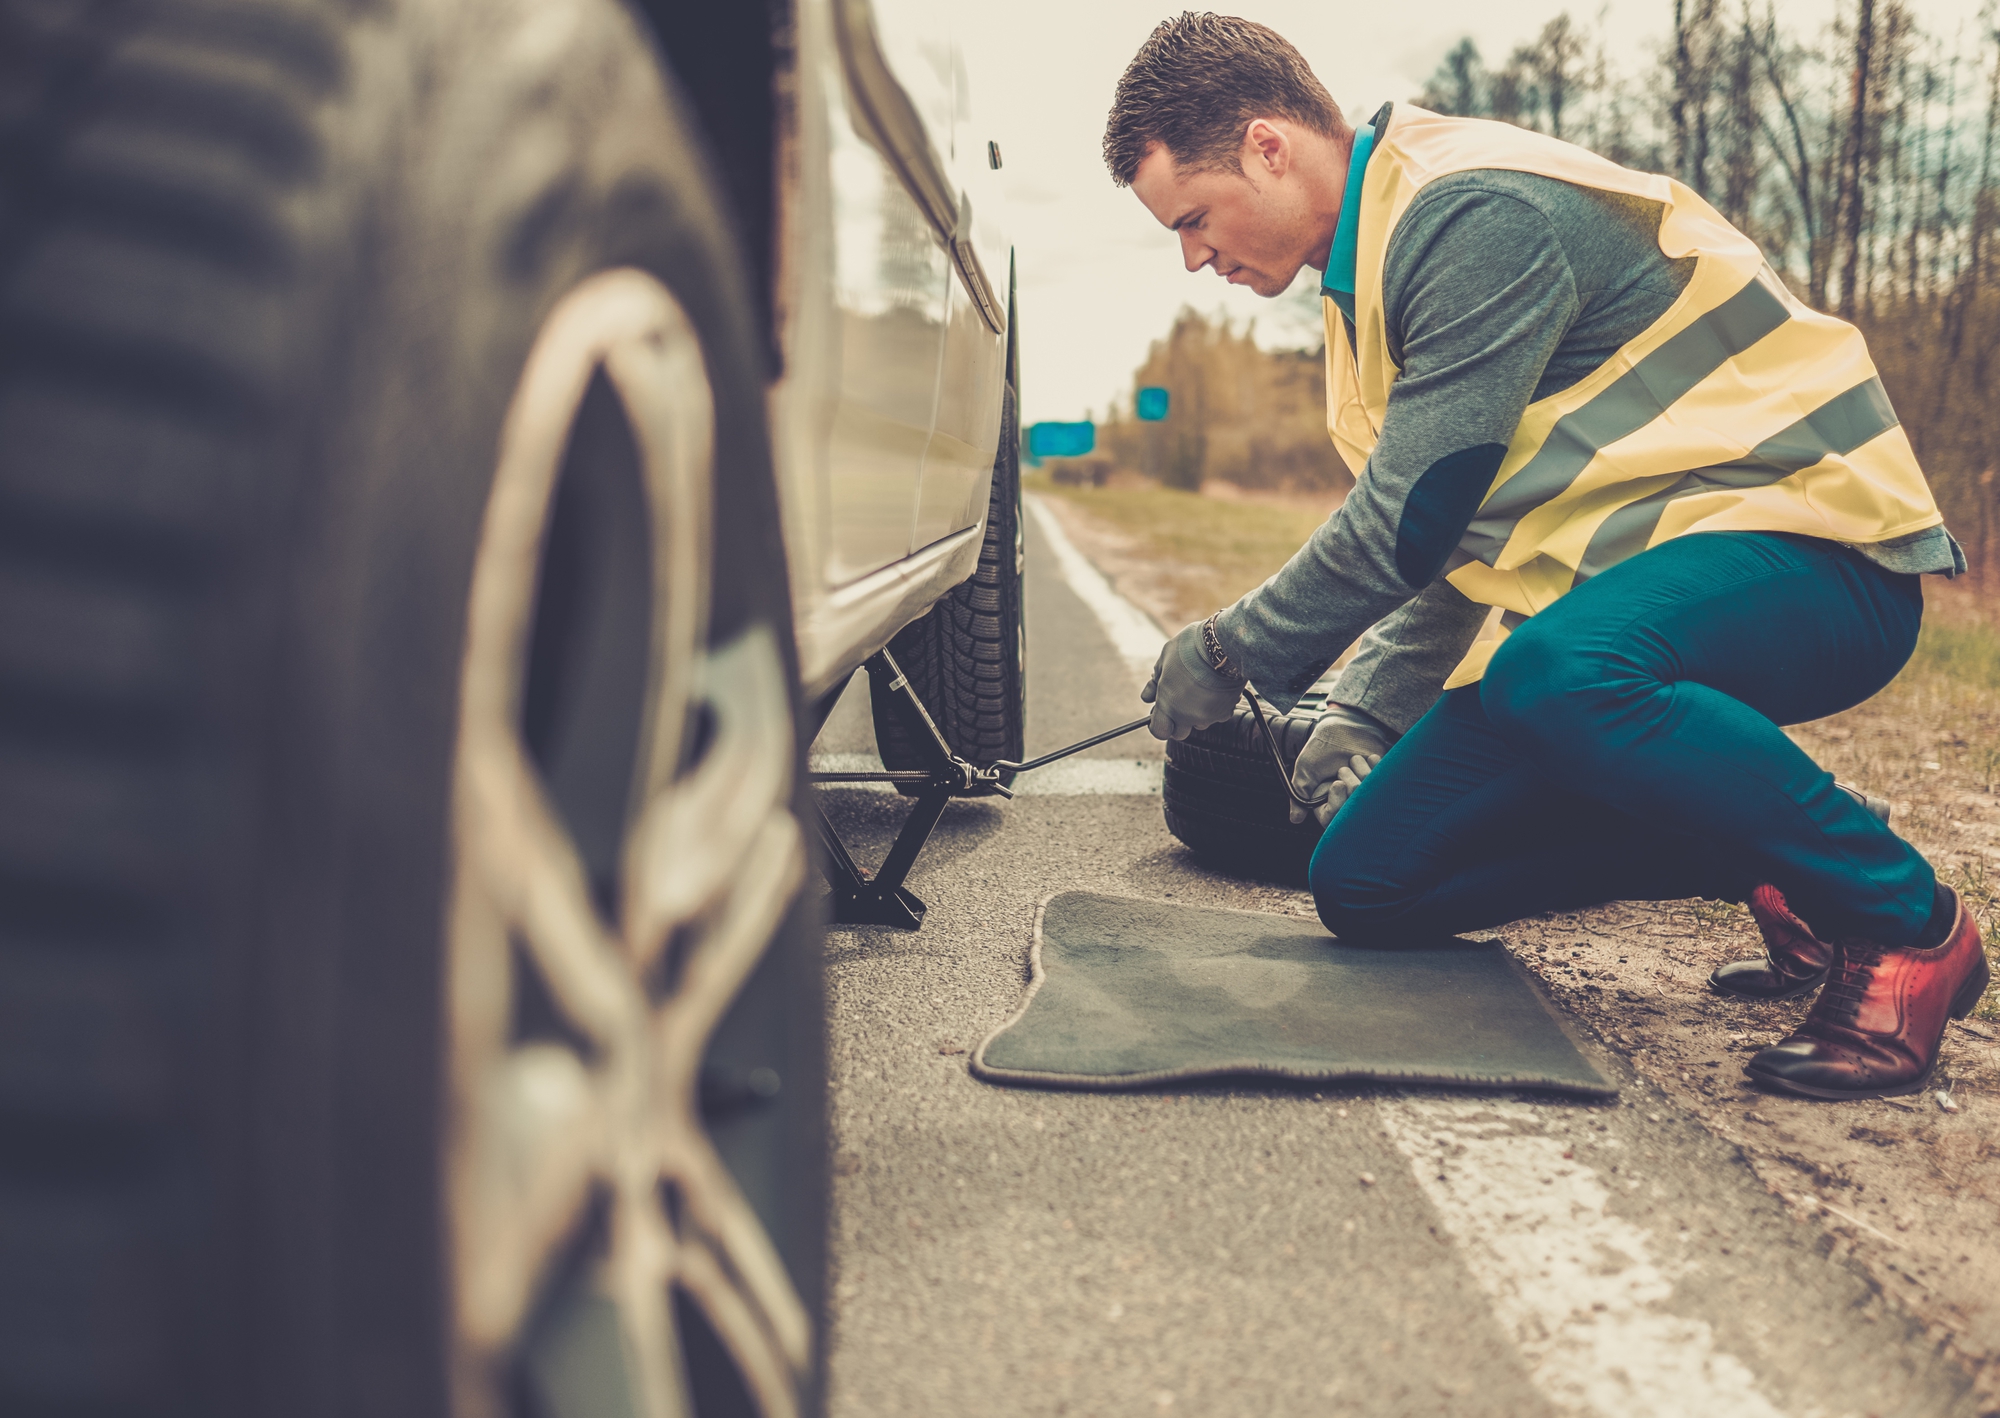 A man fixing a tire on the side of the road while considering a novated lease for his vehicle.